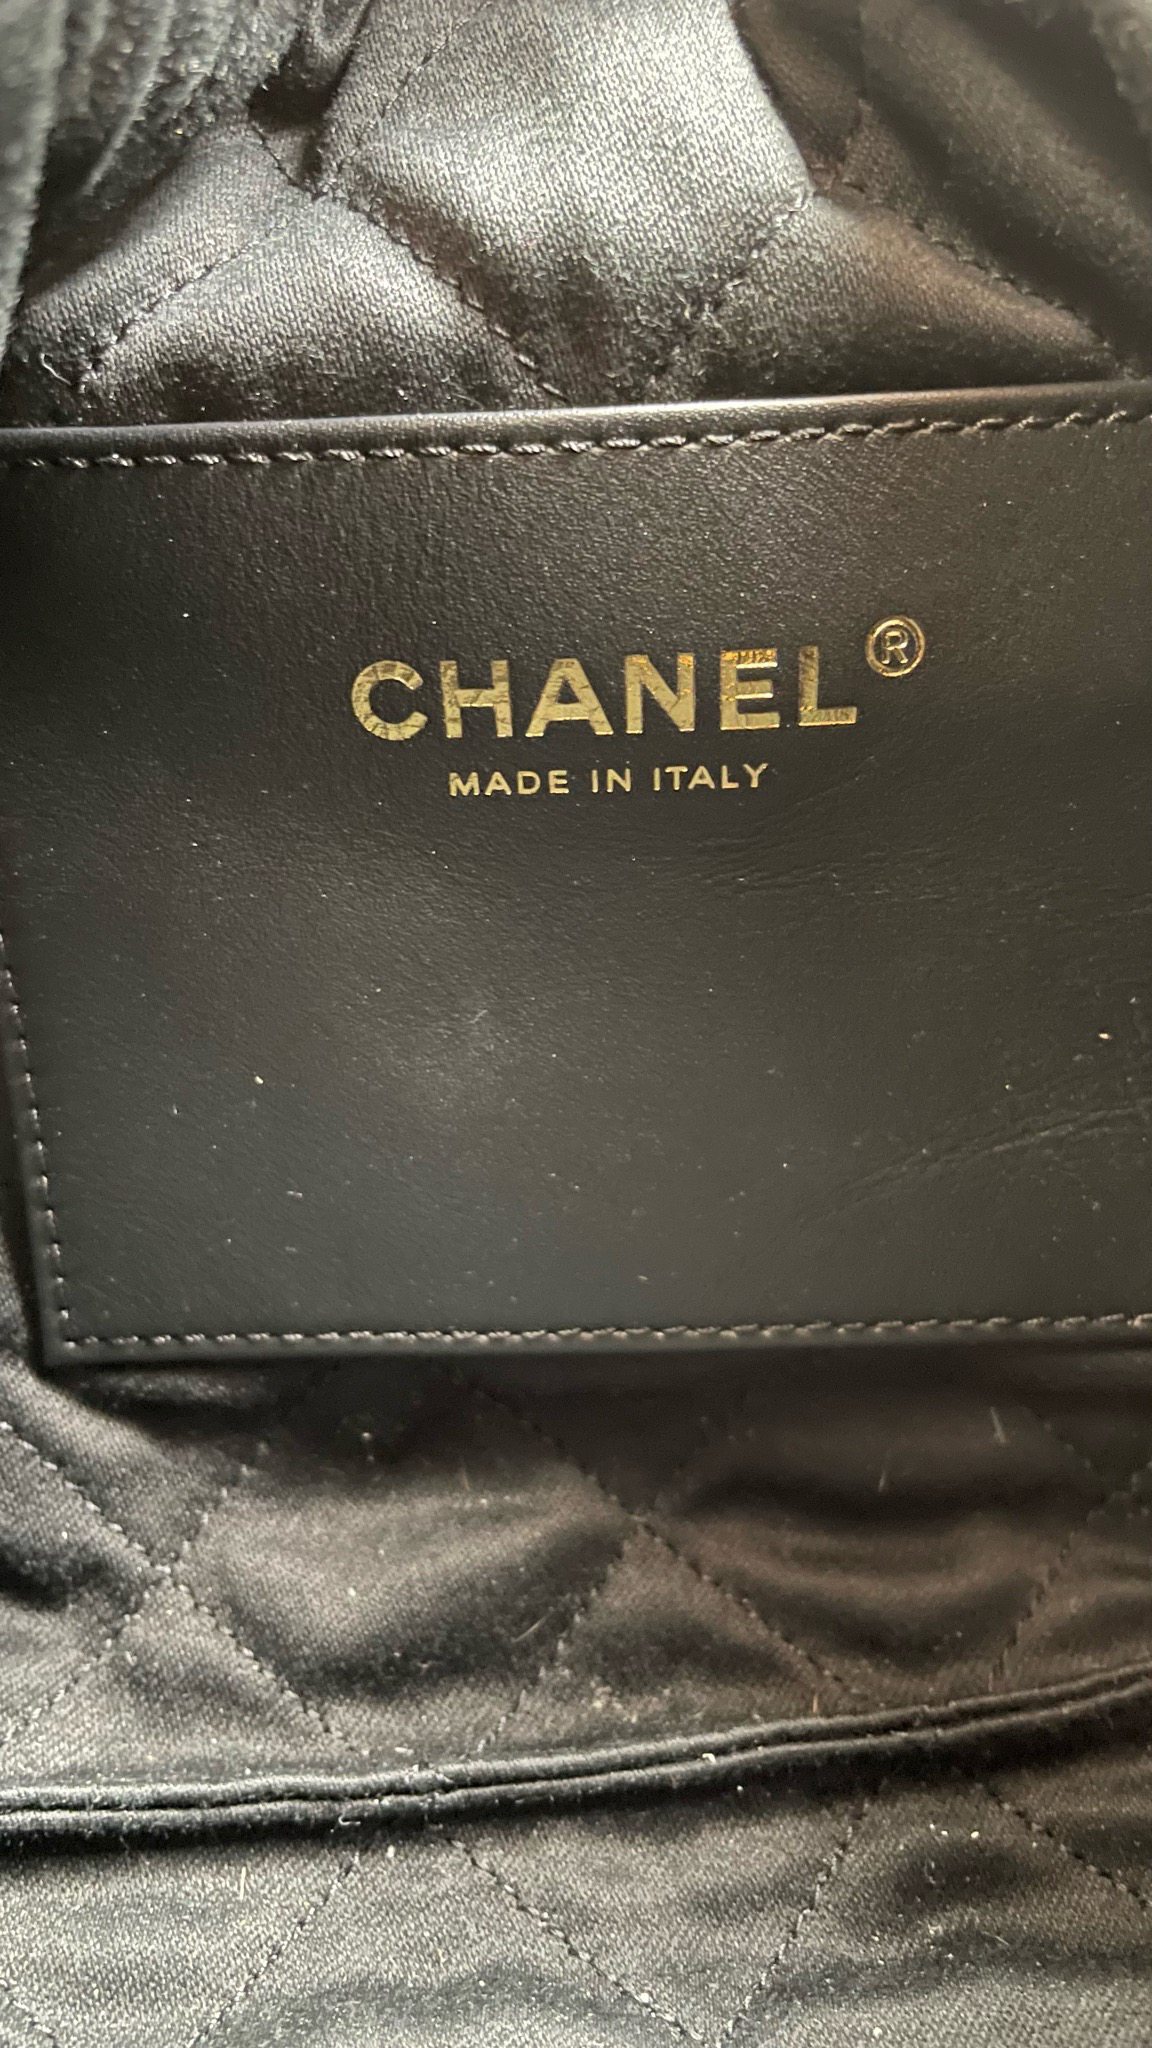 Chanel Gabrielle Backpack Small, Beige and Black, Preowned in Box WA001 -  Julia Rose Boston